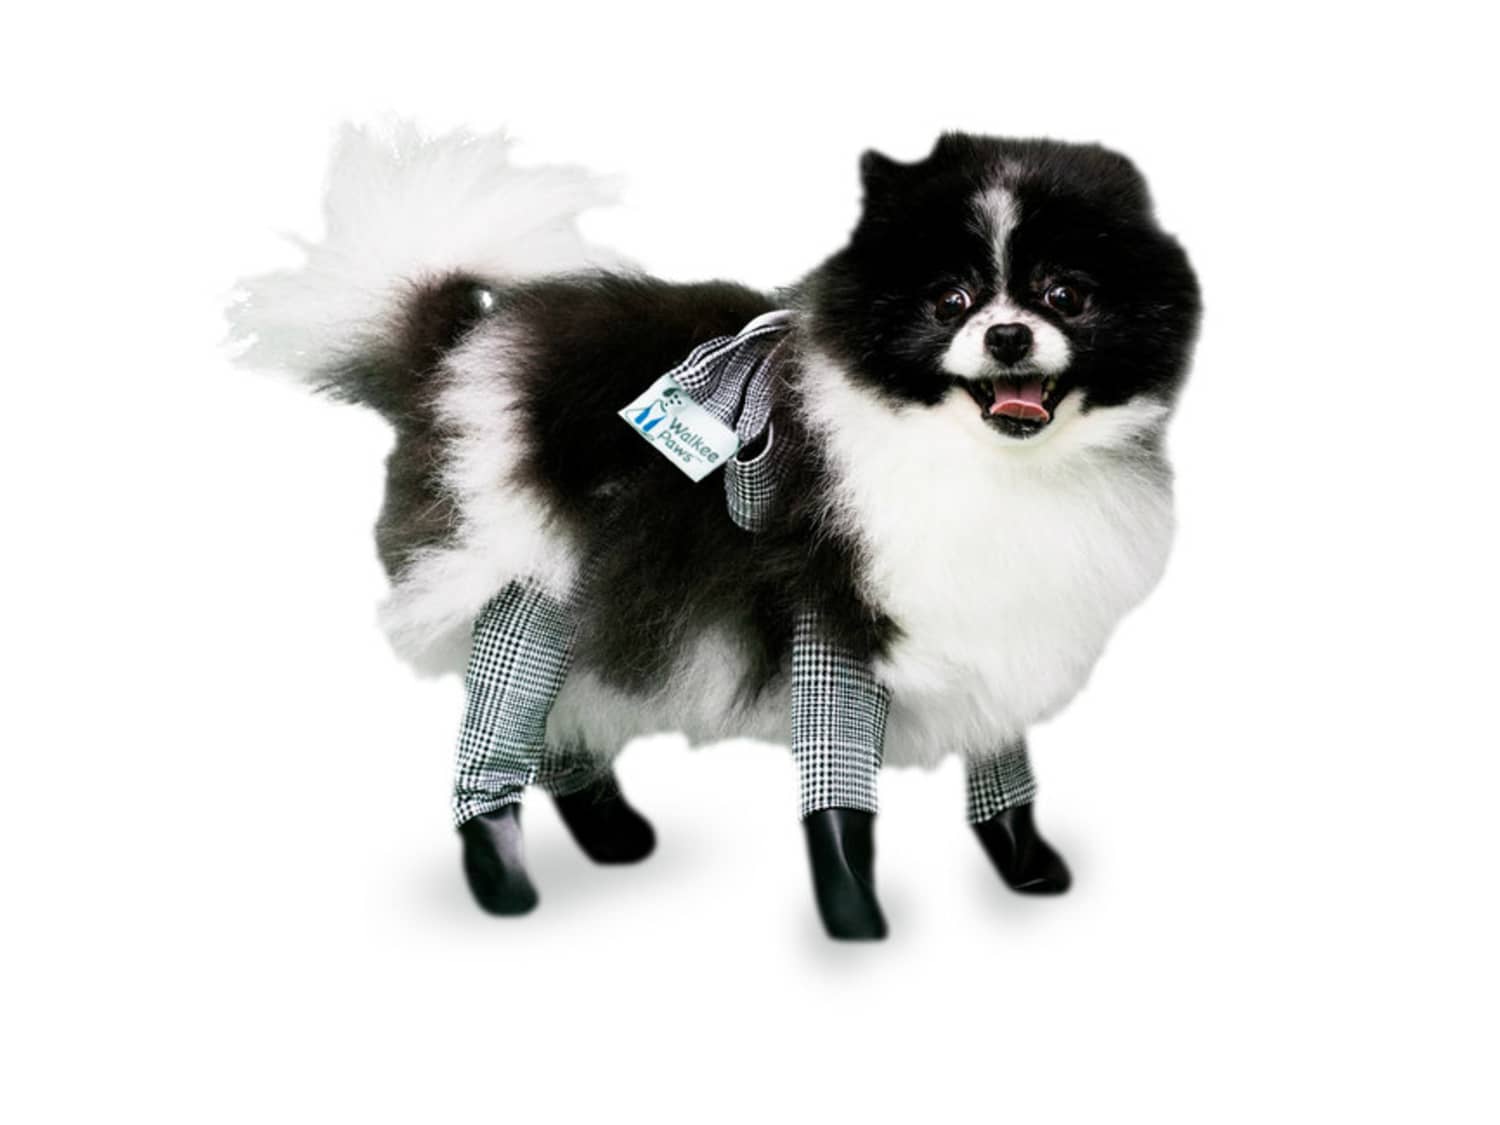 You Can Buy Your Dog Leggings To Keep Them Warm